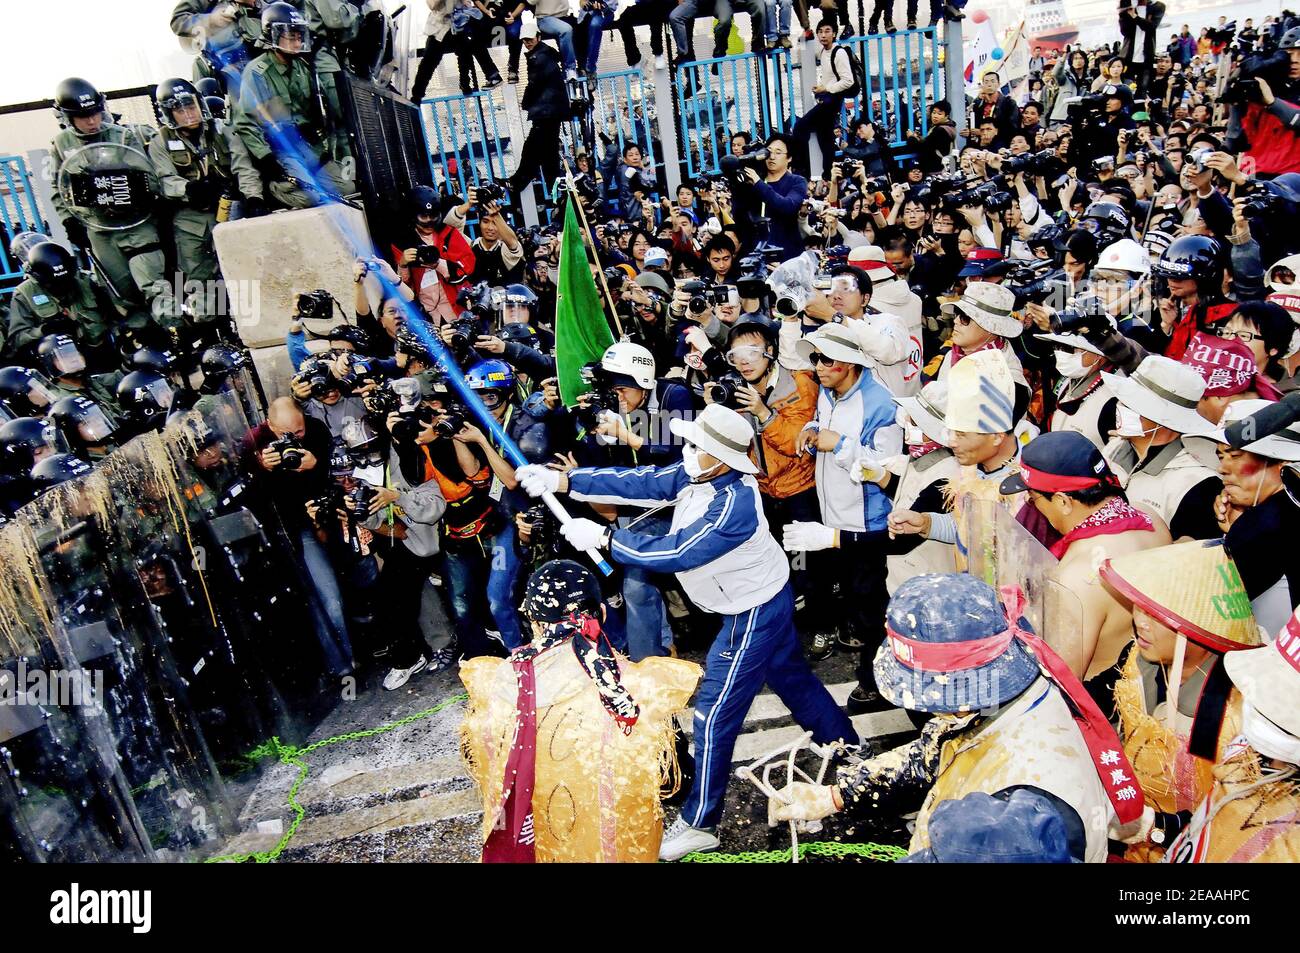 South Korean farmers clash with Hong Kong police outside the Hong Kong Convention Centre where delegates are meeting at the sixth Ministerial Conference of the World Trade Organization on December 17, 2005. The South Koreans have been prominent among demo Stock Photo